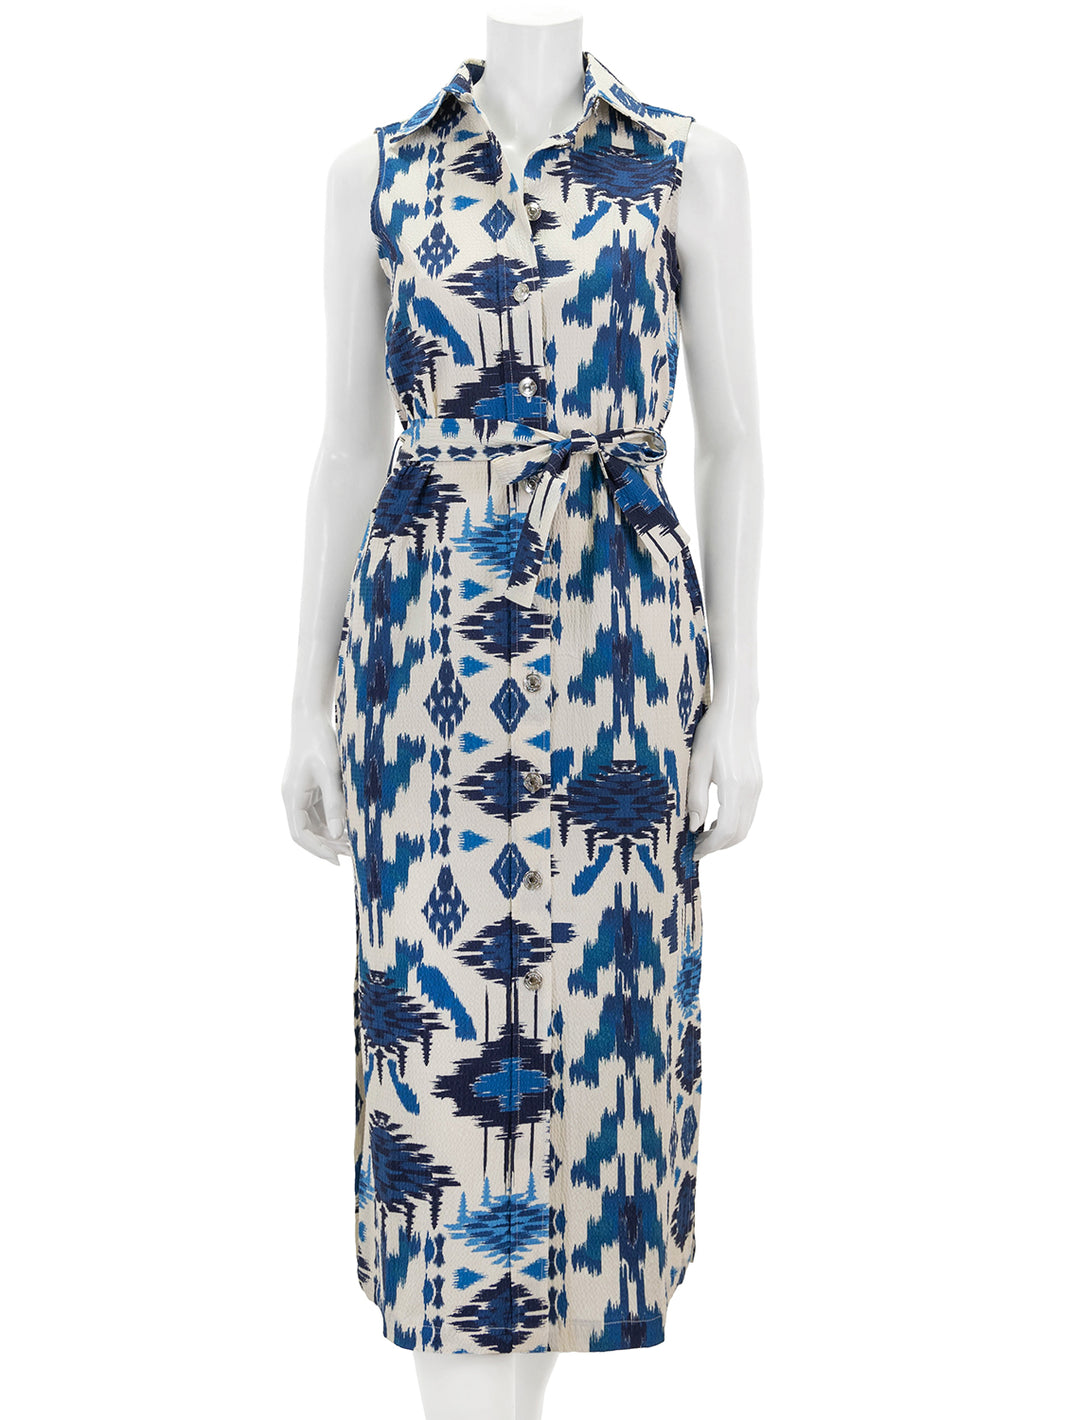 Front view of Vilagallo's livia dress in blue ikat.